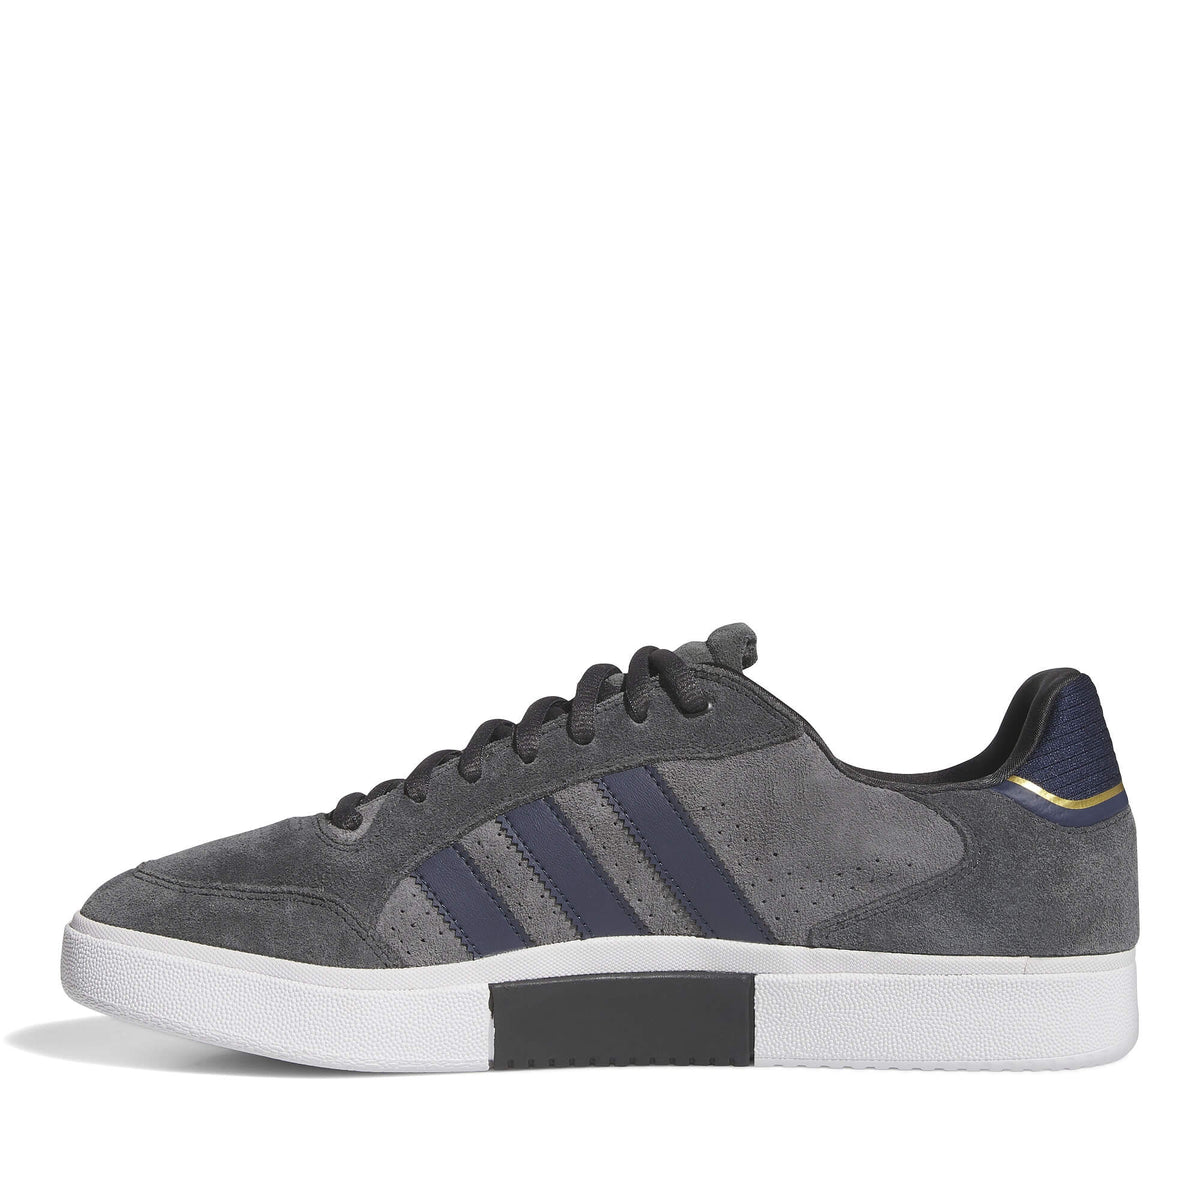 Adidas Skateboarding Tyshawn Low Shoes Carbon Grey Five